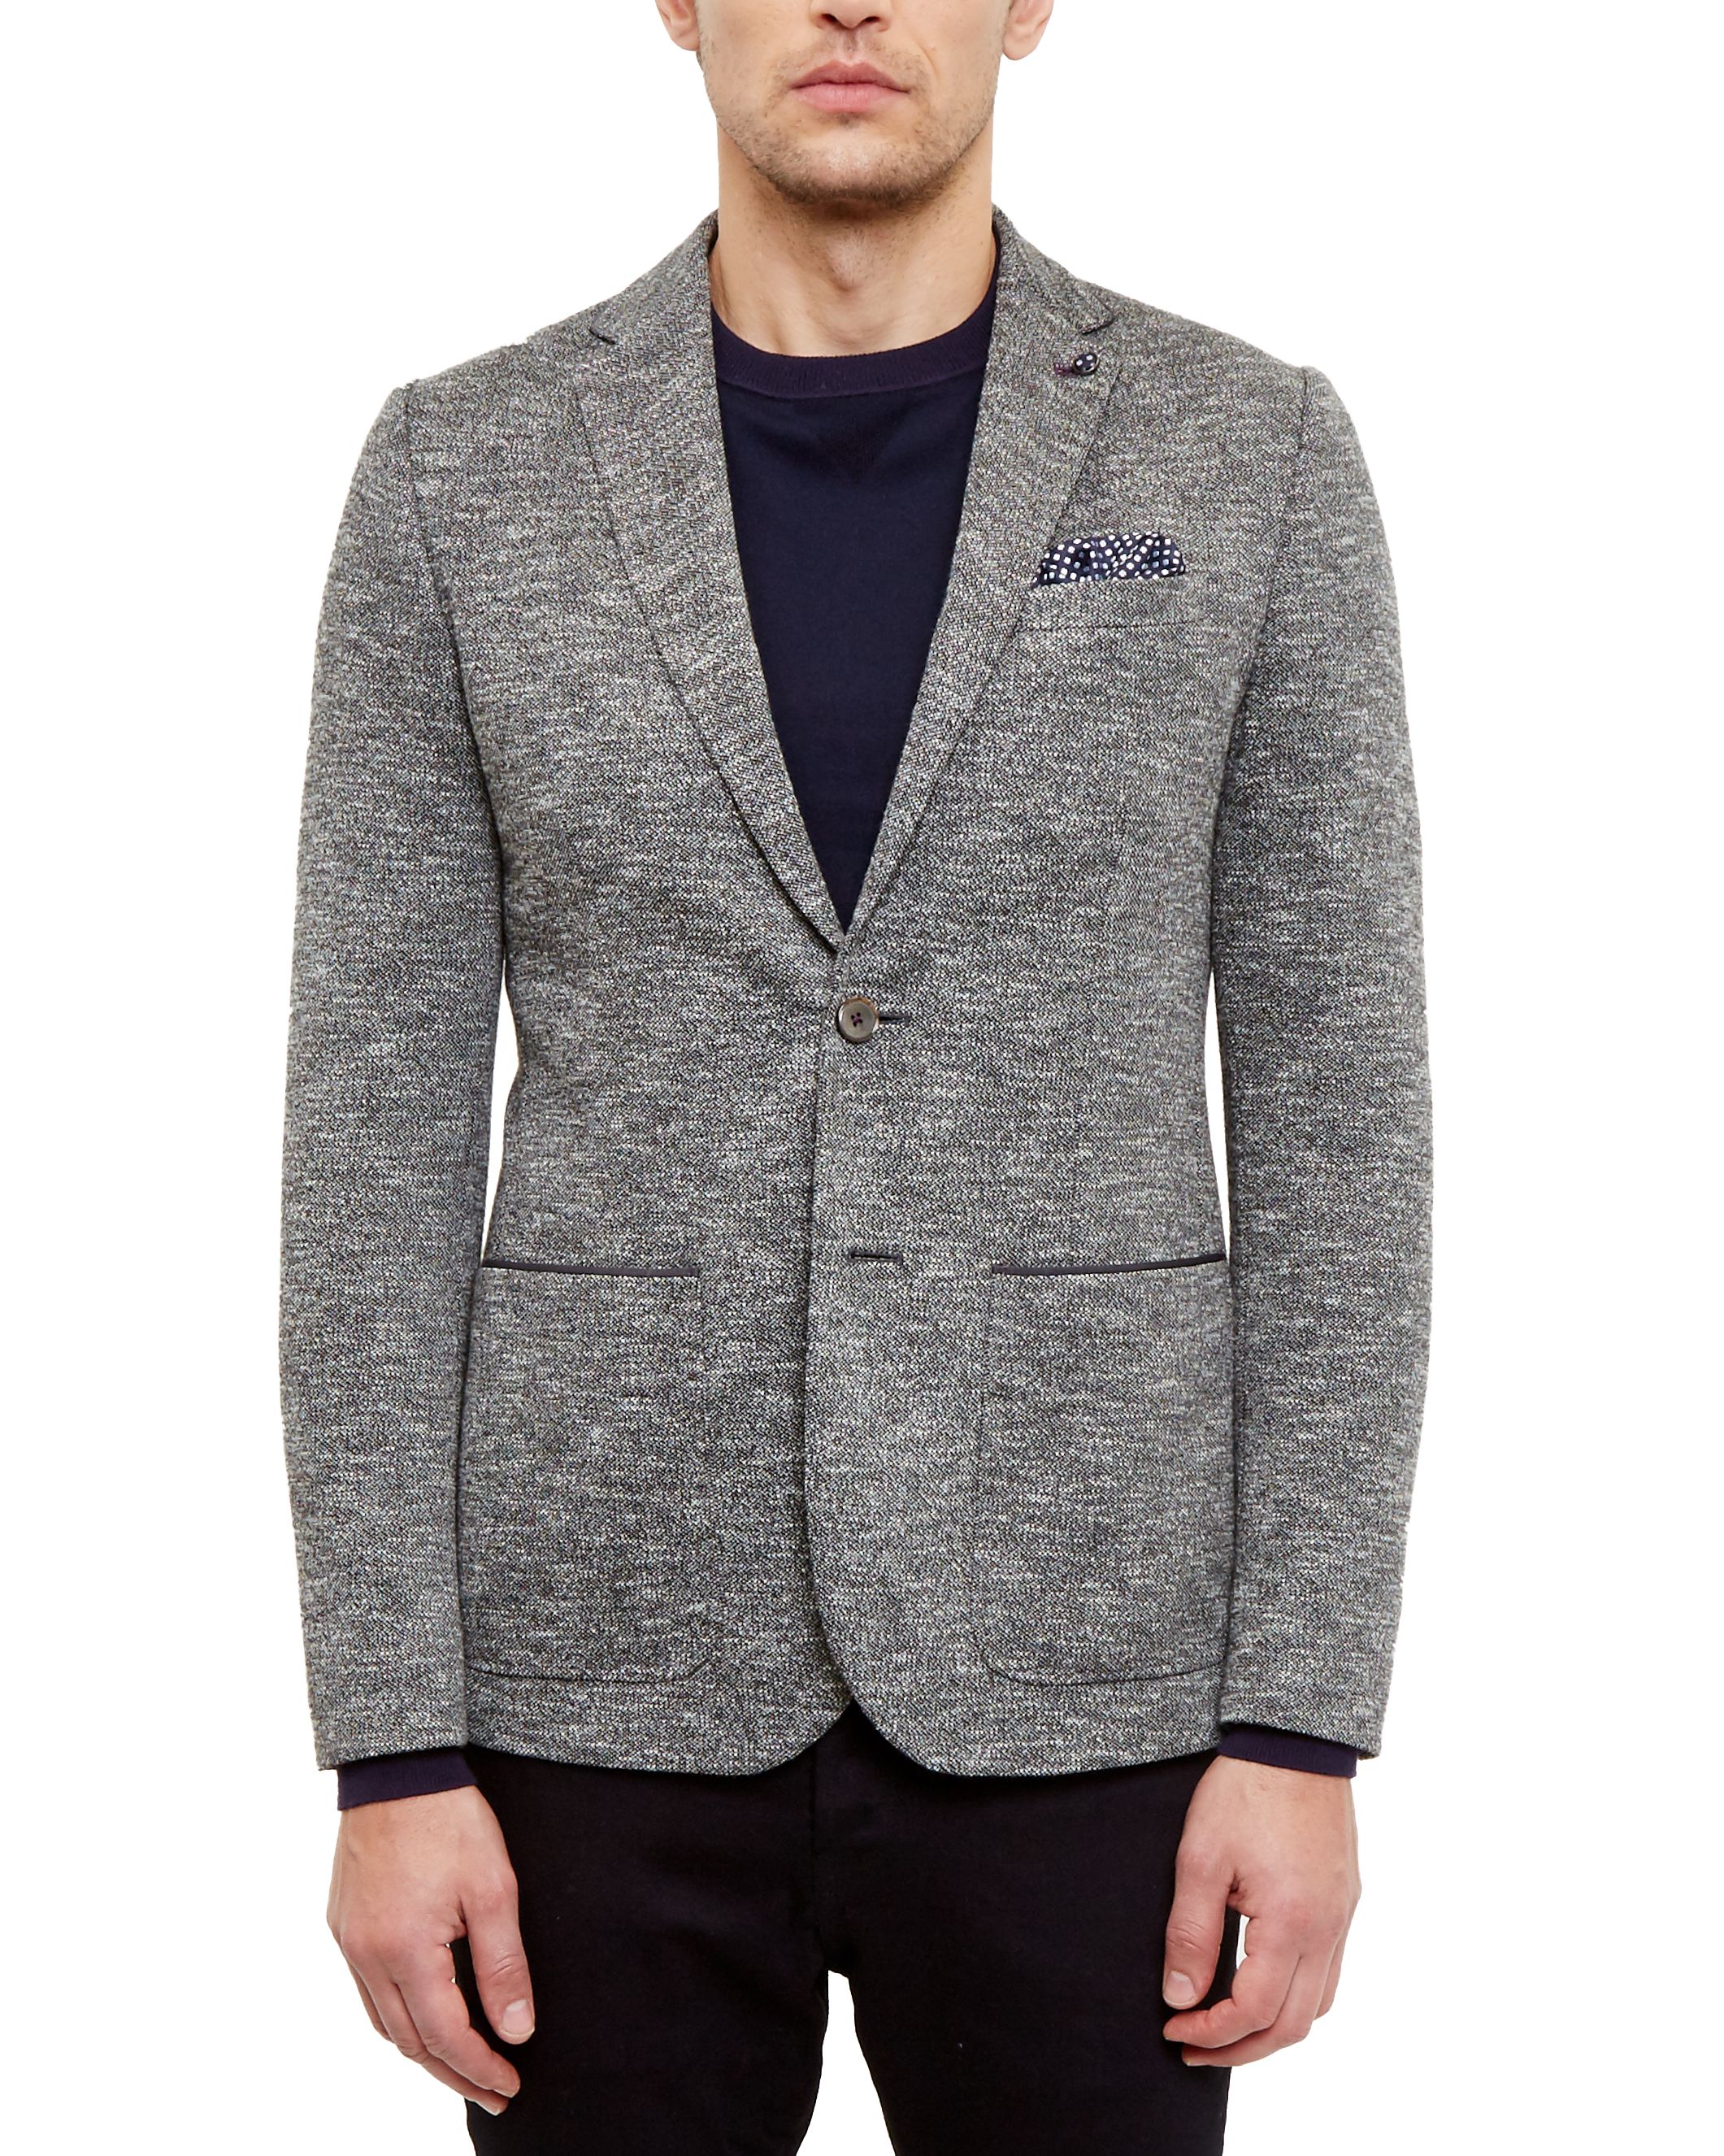 Ted Baker Italy Textured Jersey Blazer, Charcoal